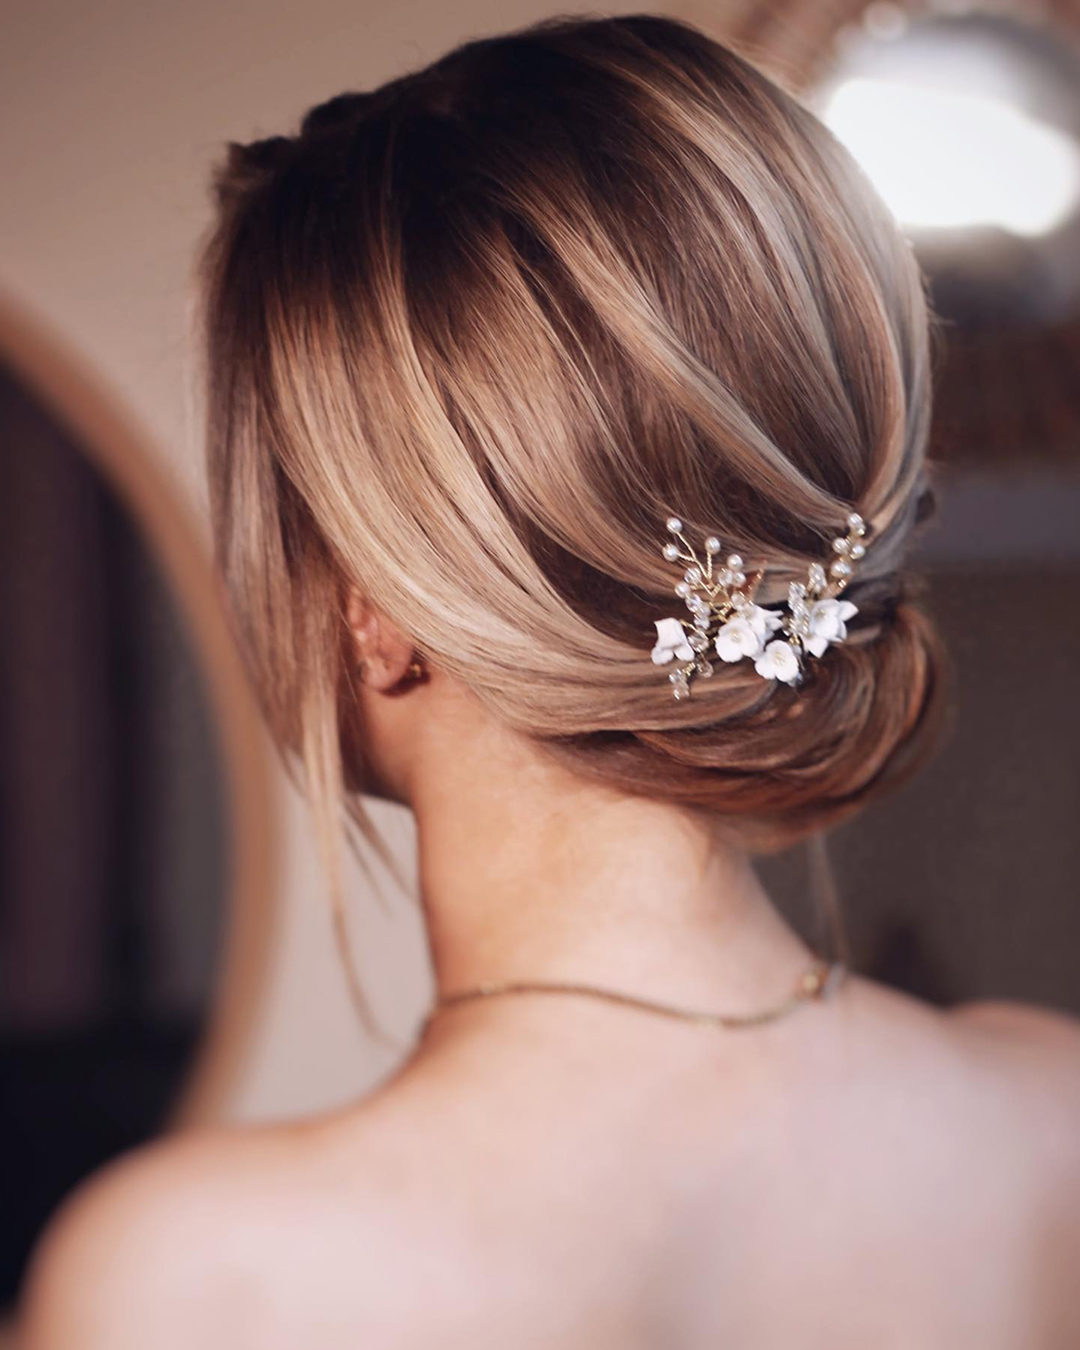 Diy Wedding Hairstyles That Easy To